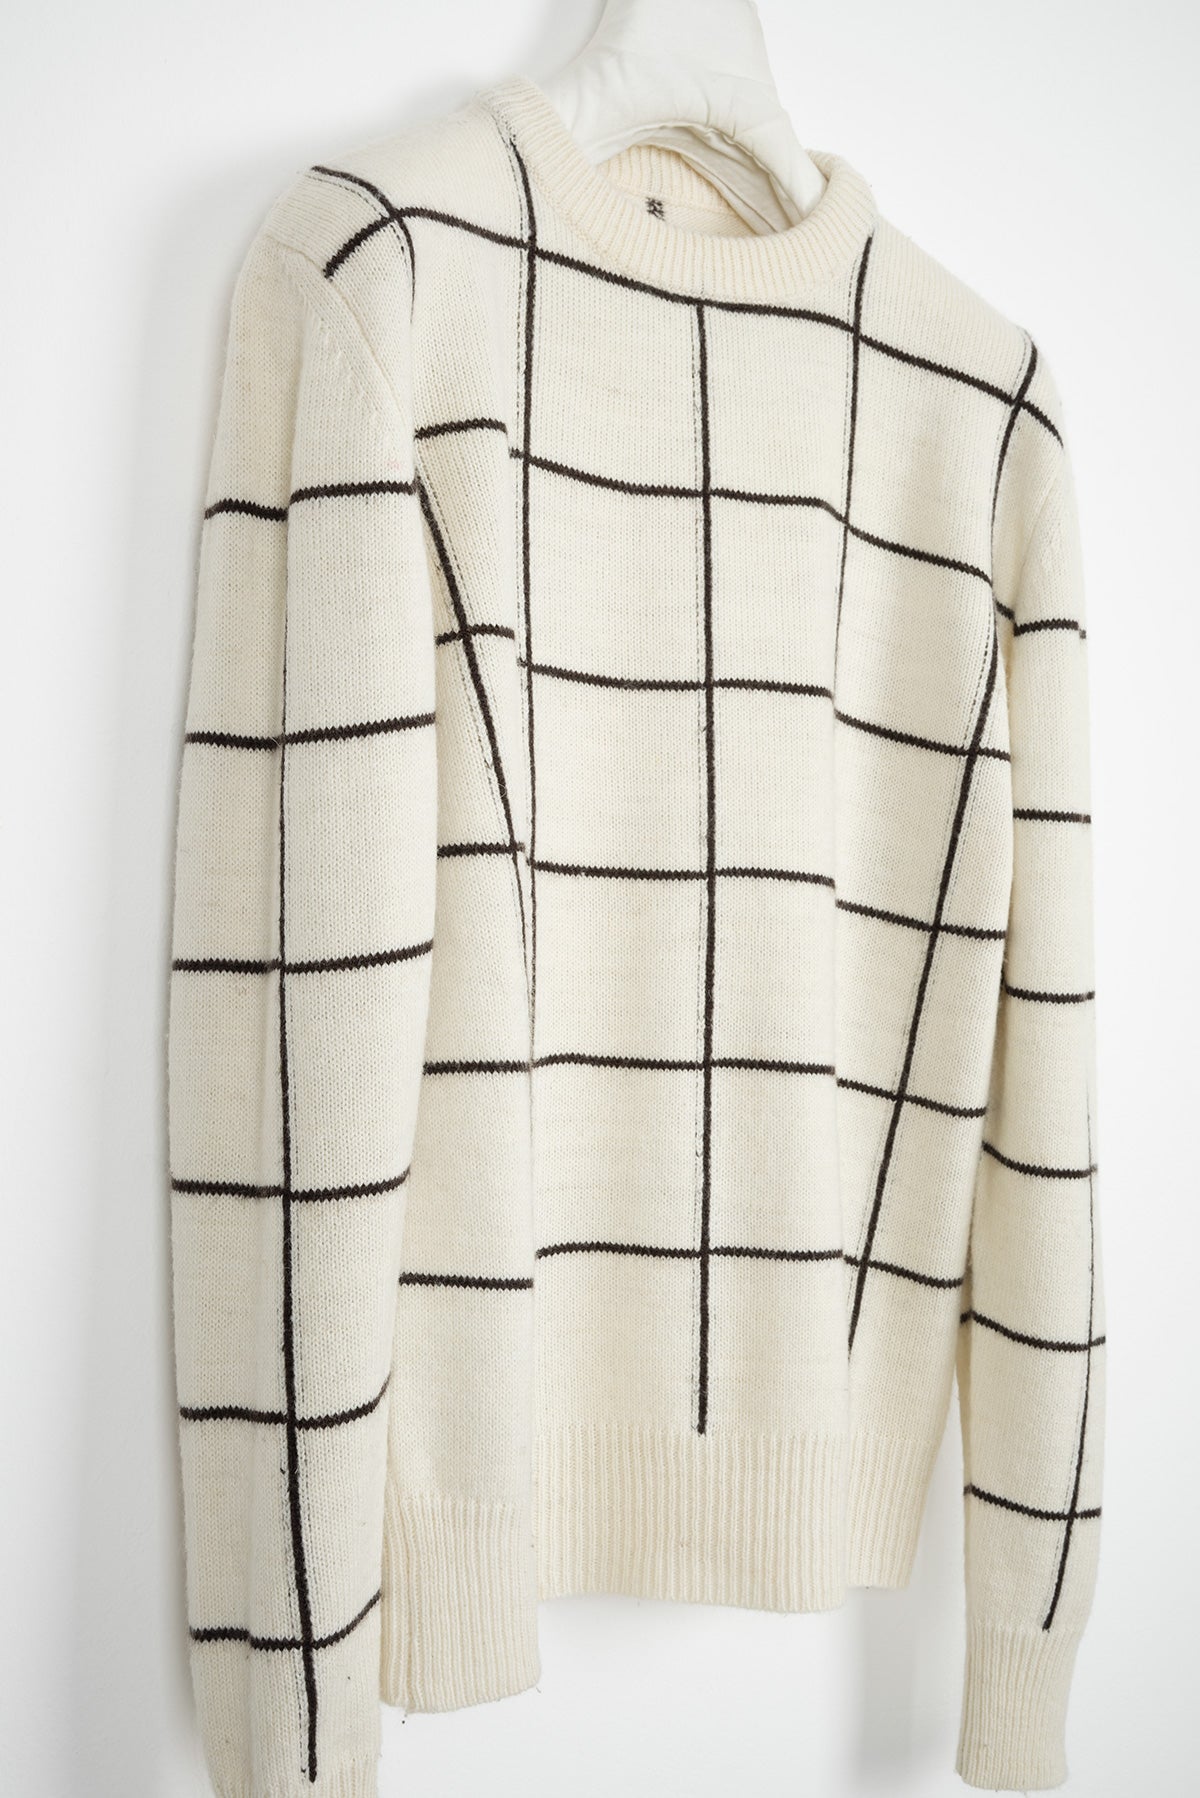 2002 A/W CHECKED CREAM WOOL SWEATER BY MISS DEANNA